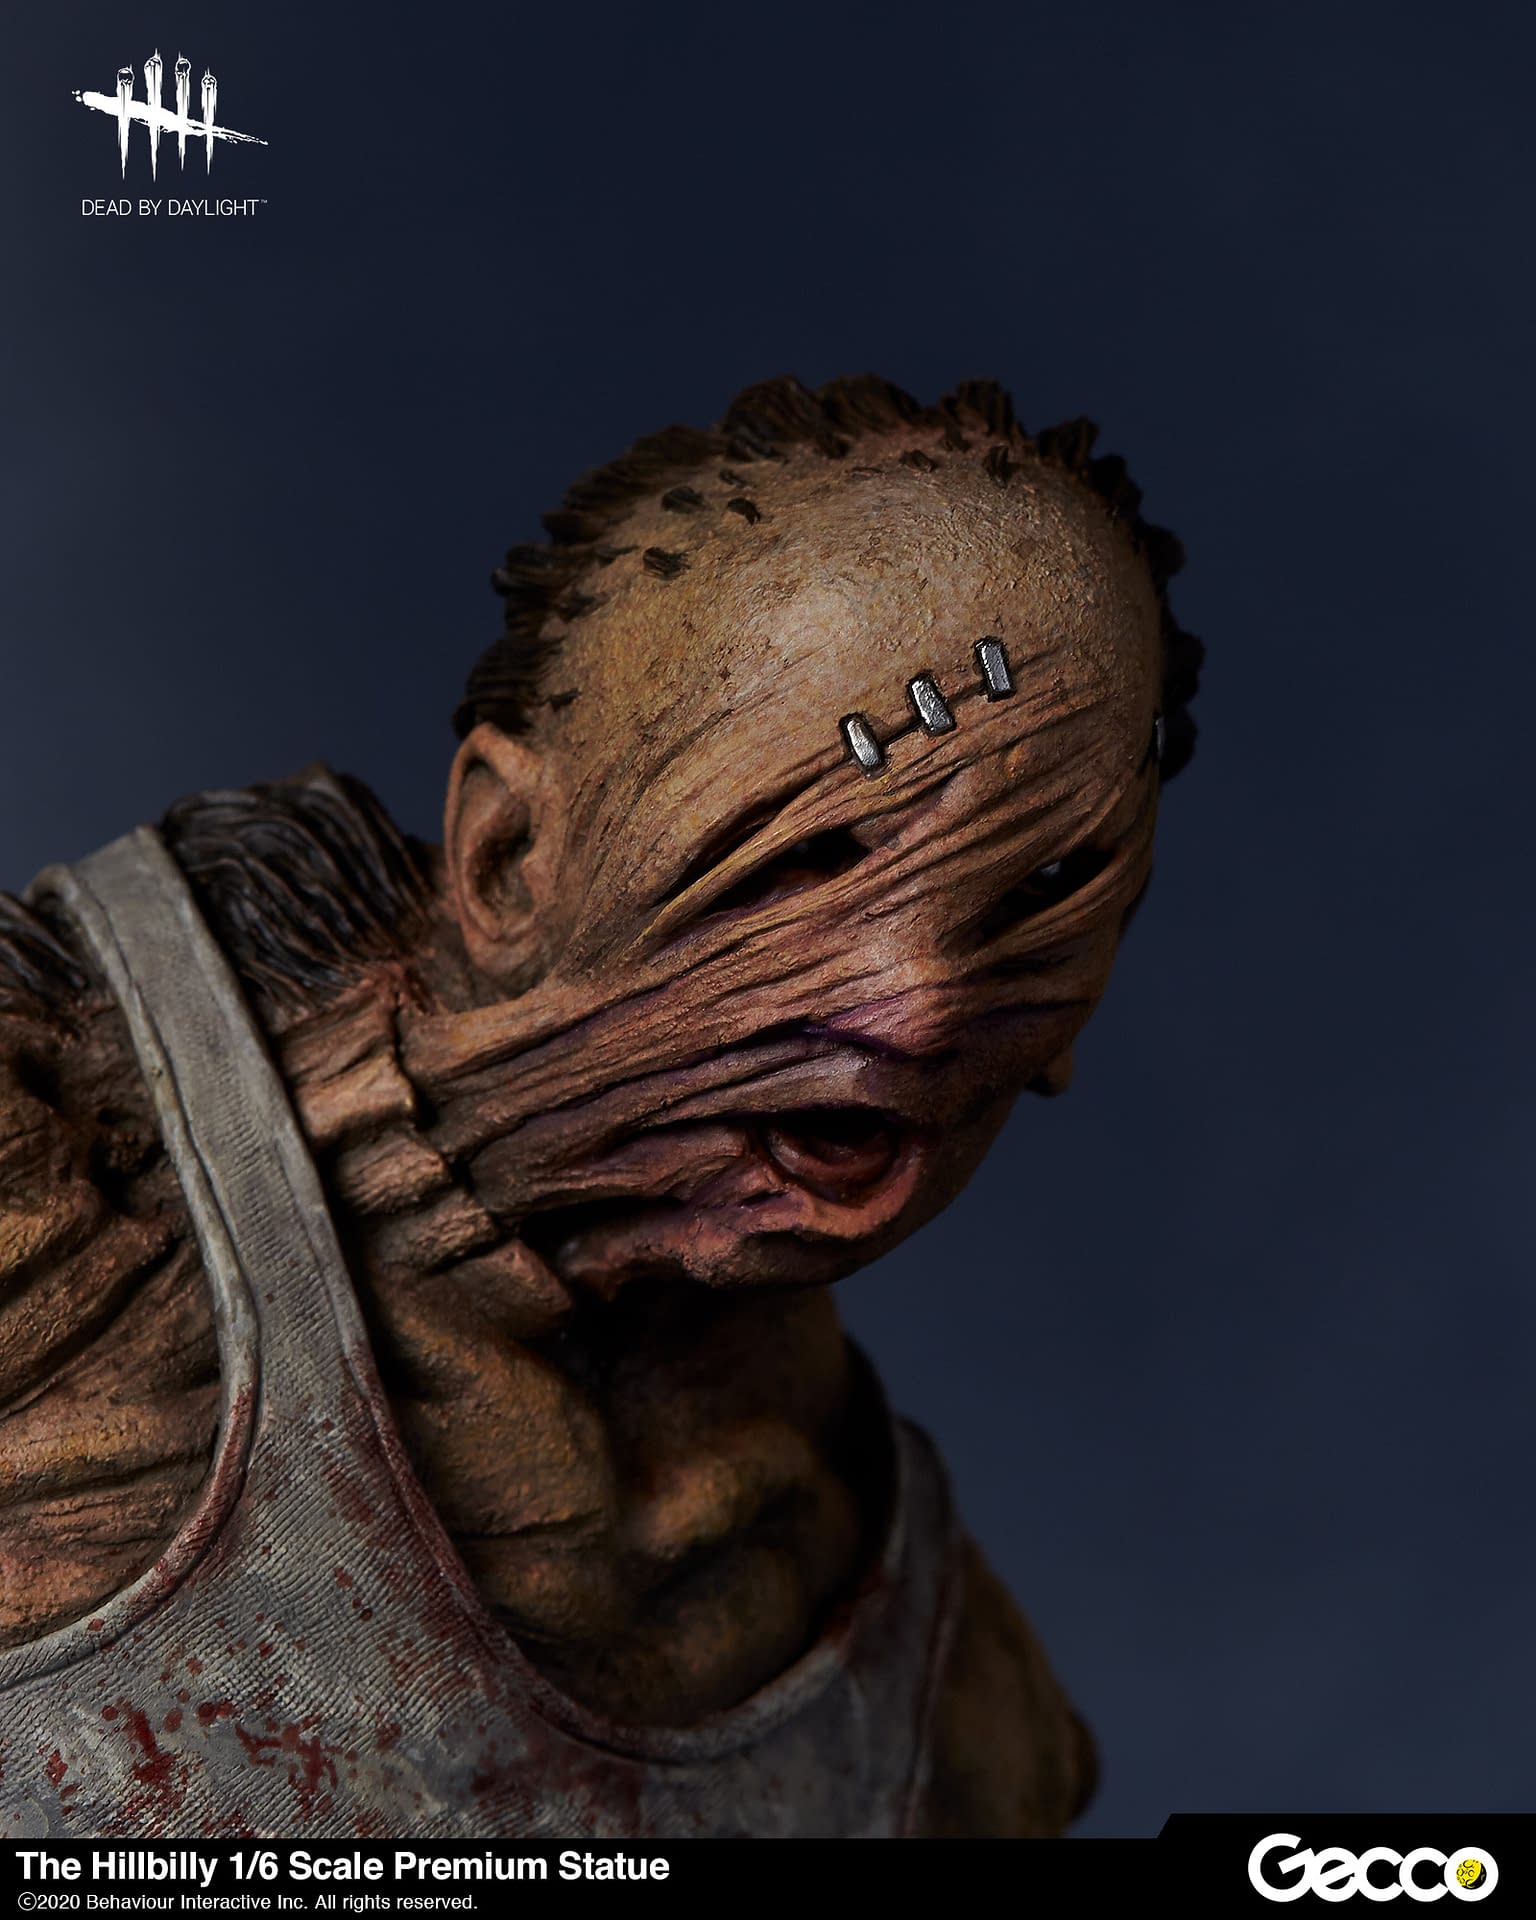 Gecco-Dead-by-Daylight-Hillbilly-Statue-012